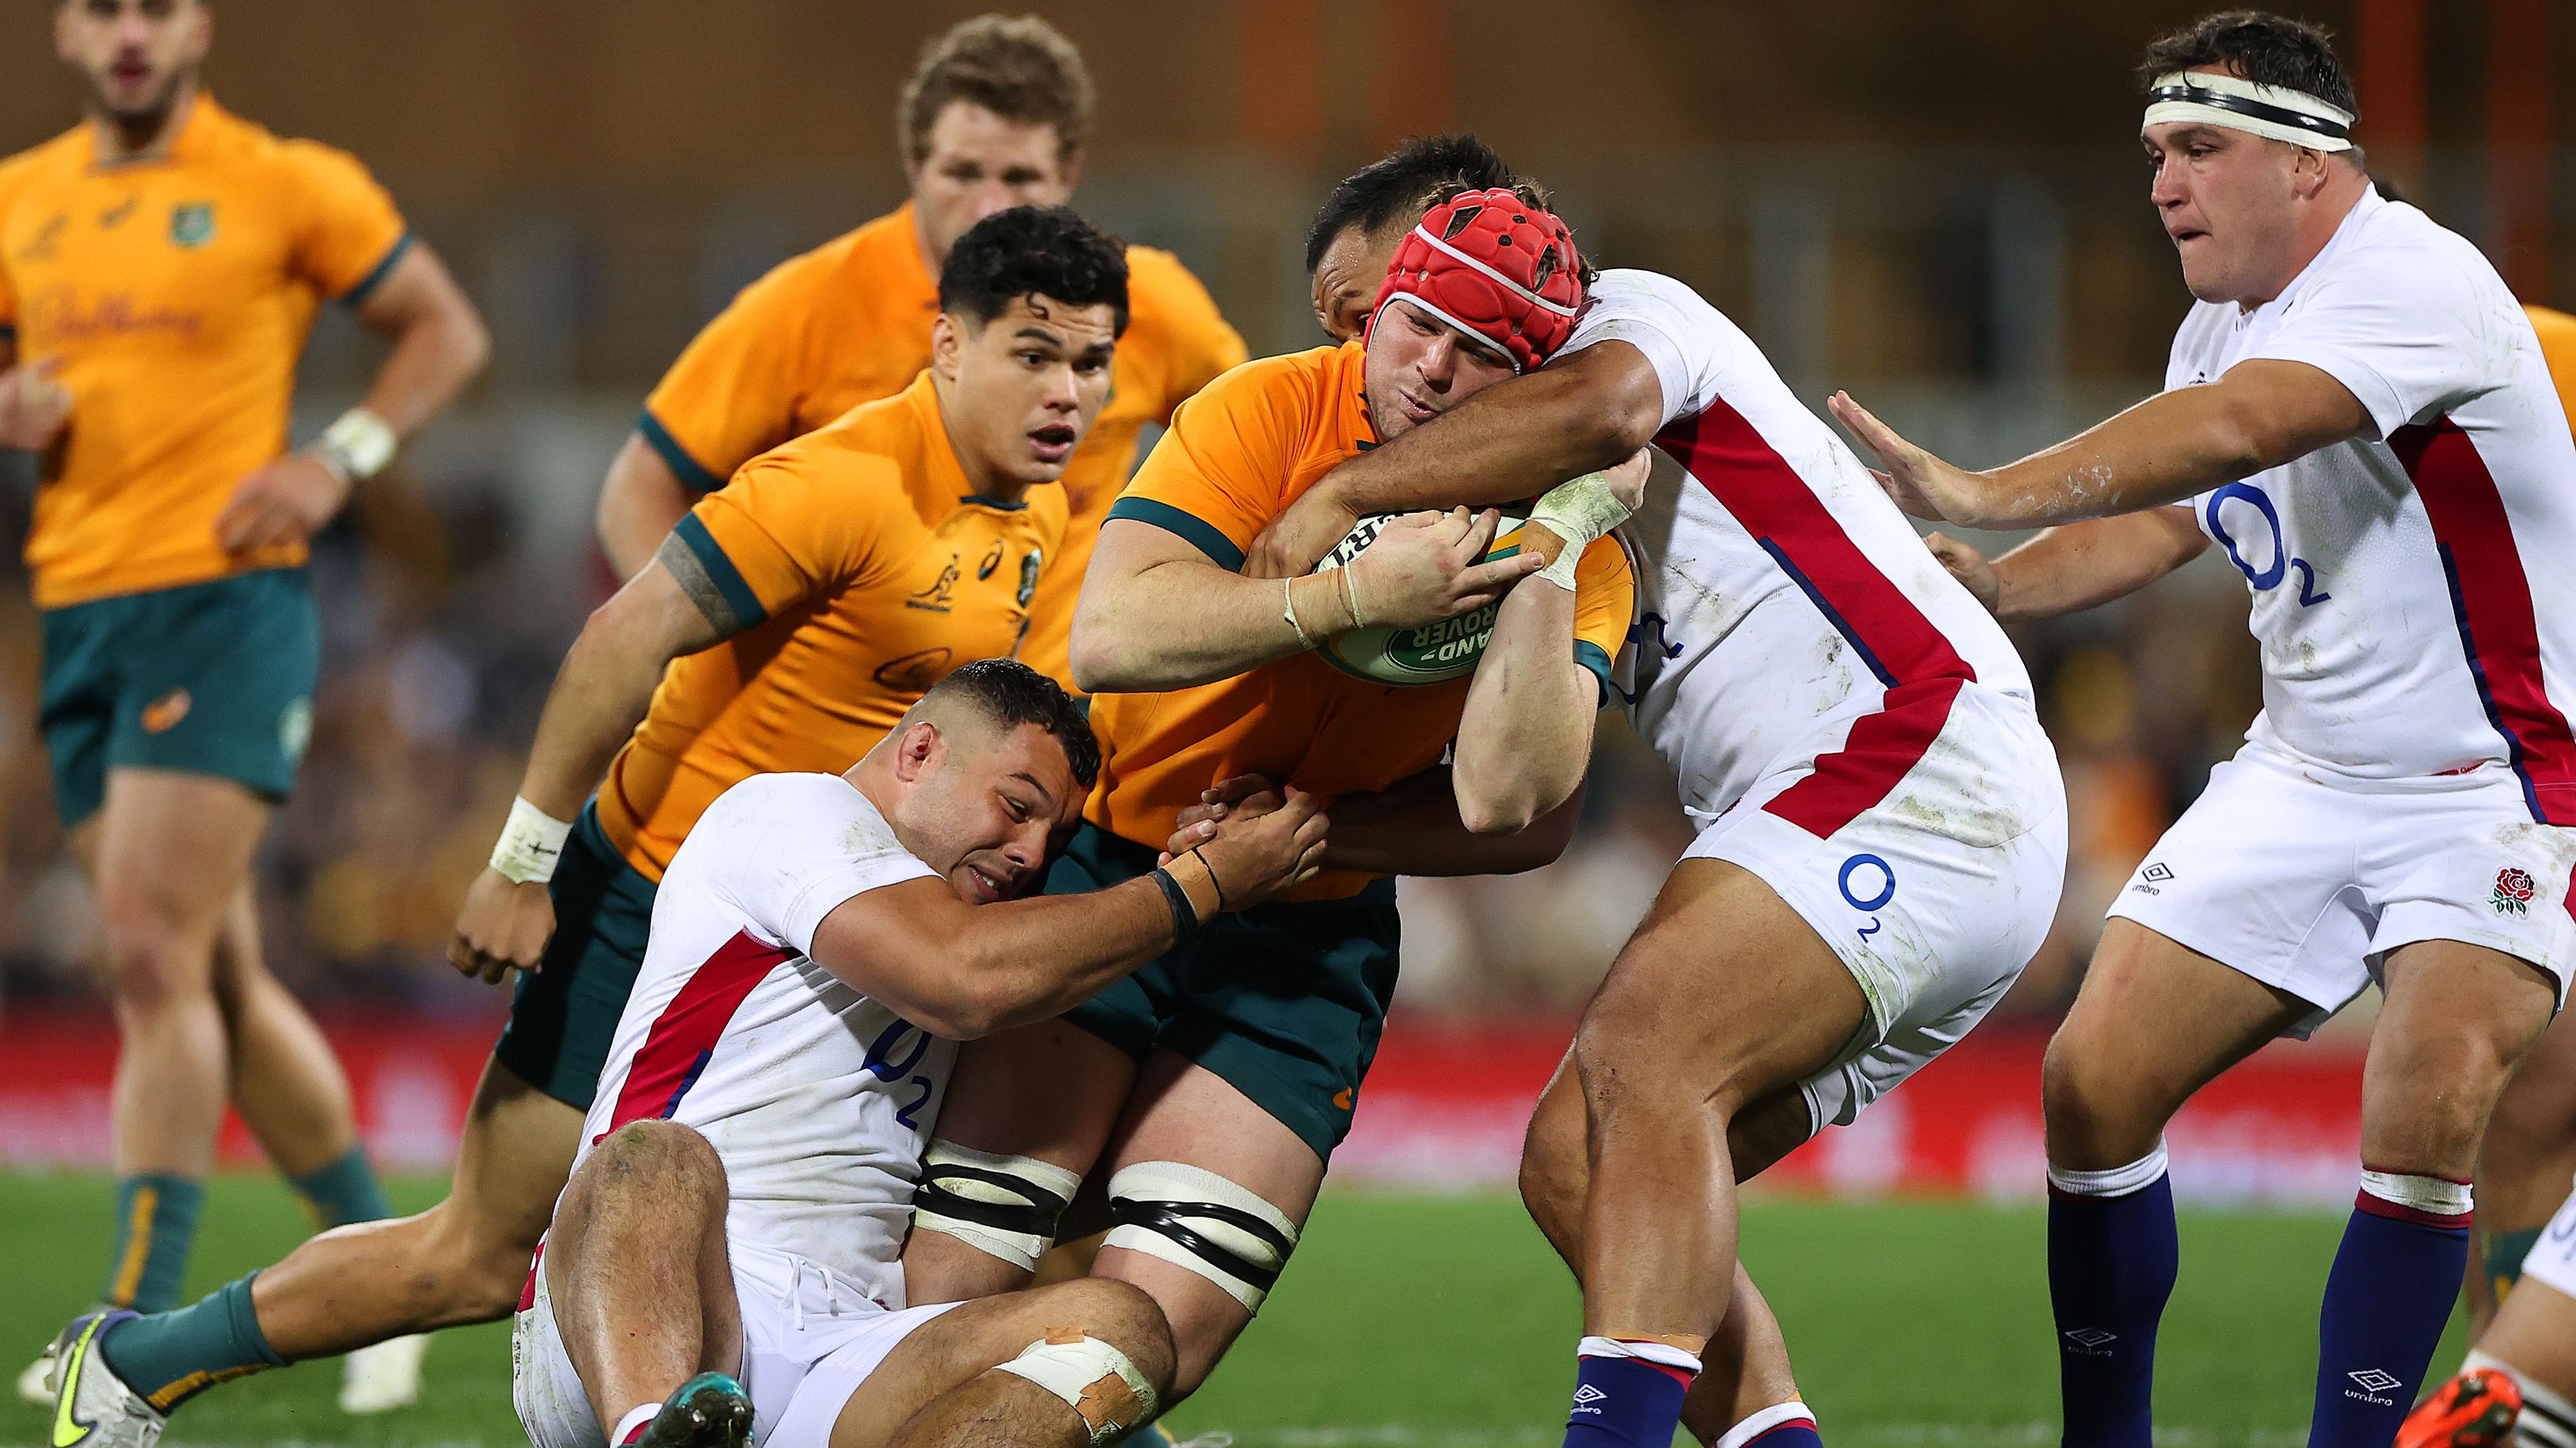 Harry Wilson of the Wallabies is tackled by a member of the England rugby team.